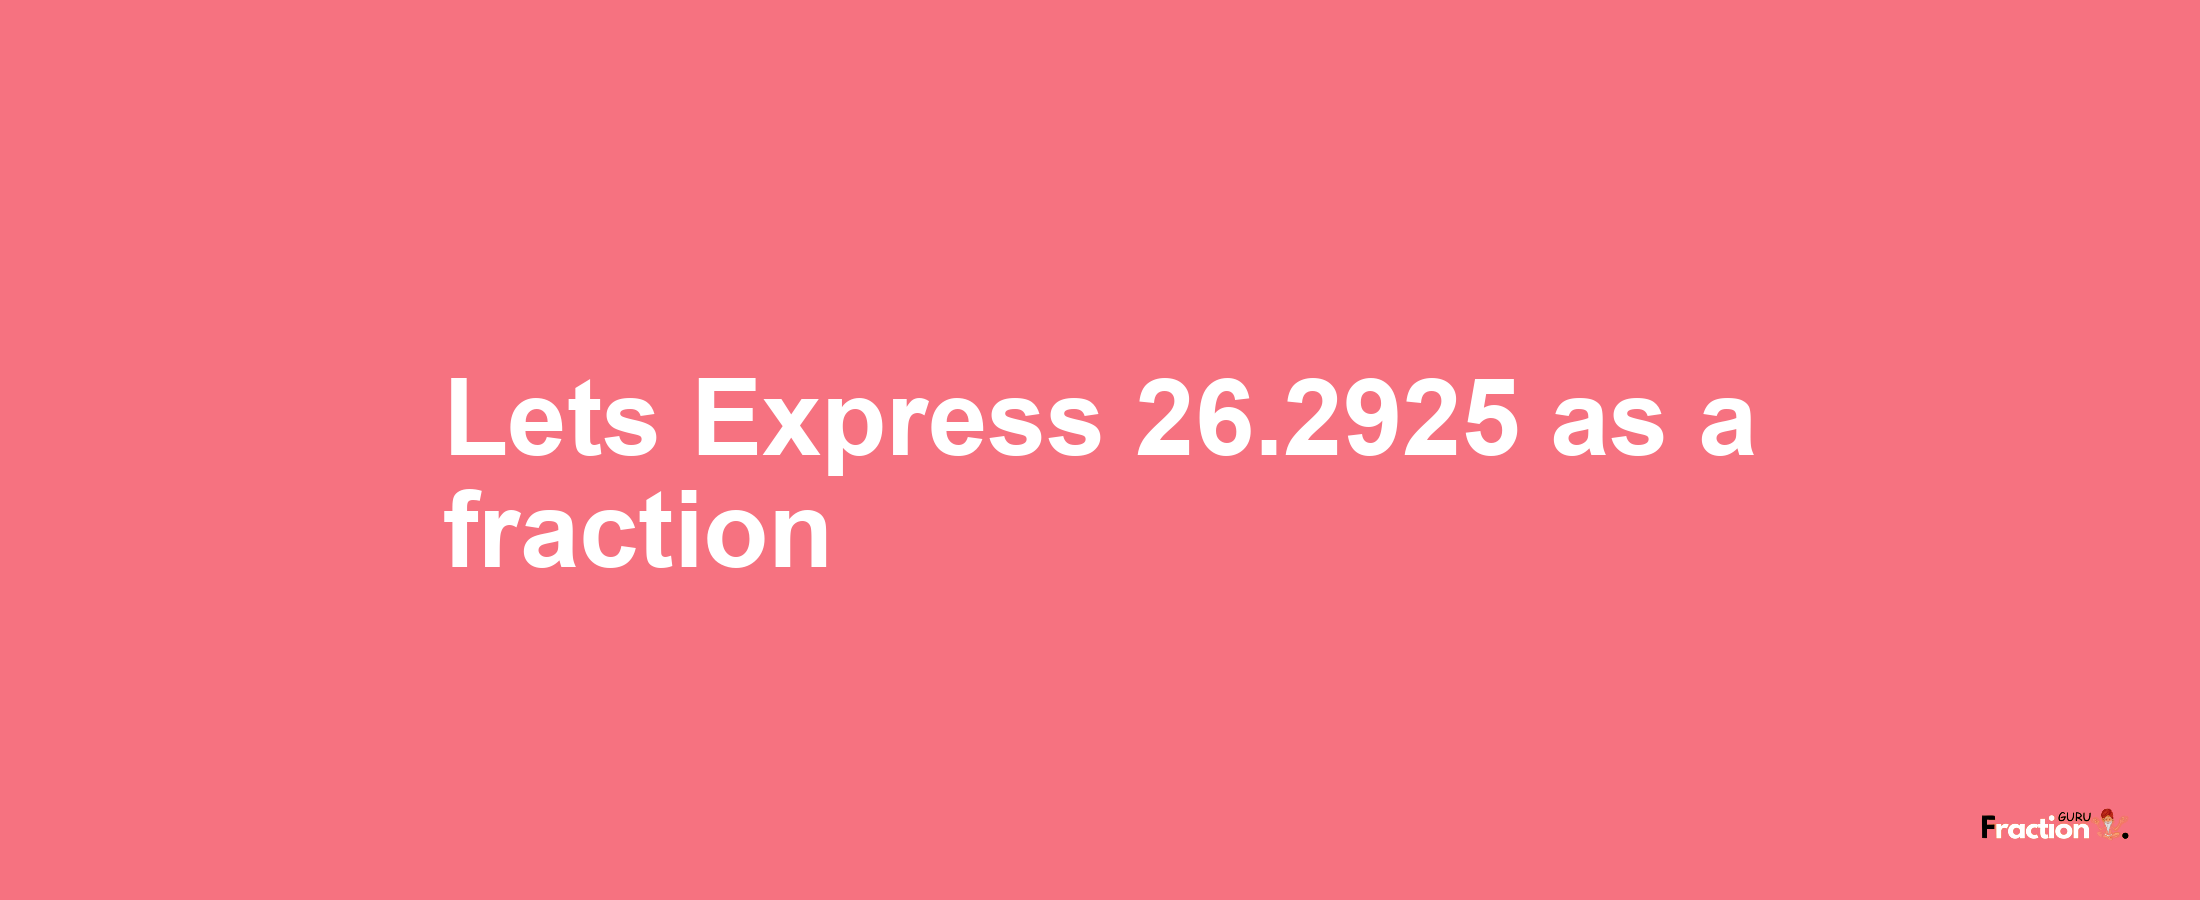 Lets Express 26.2925 as afraction